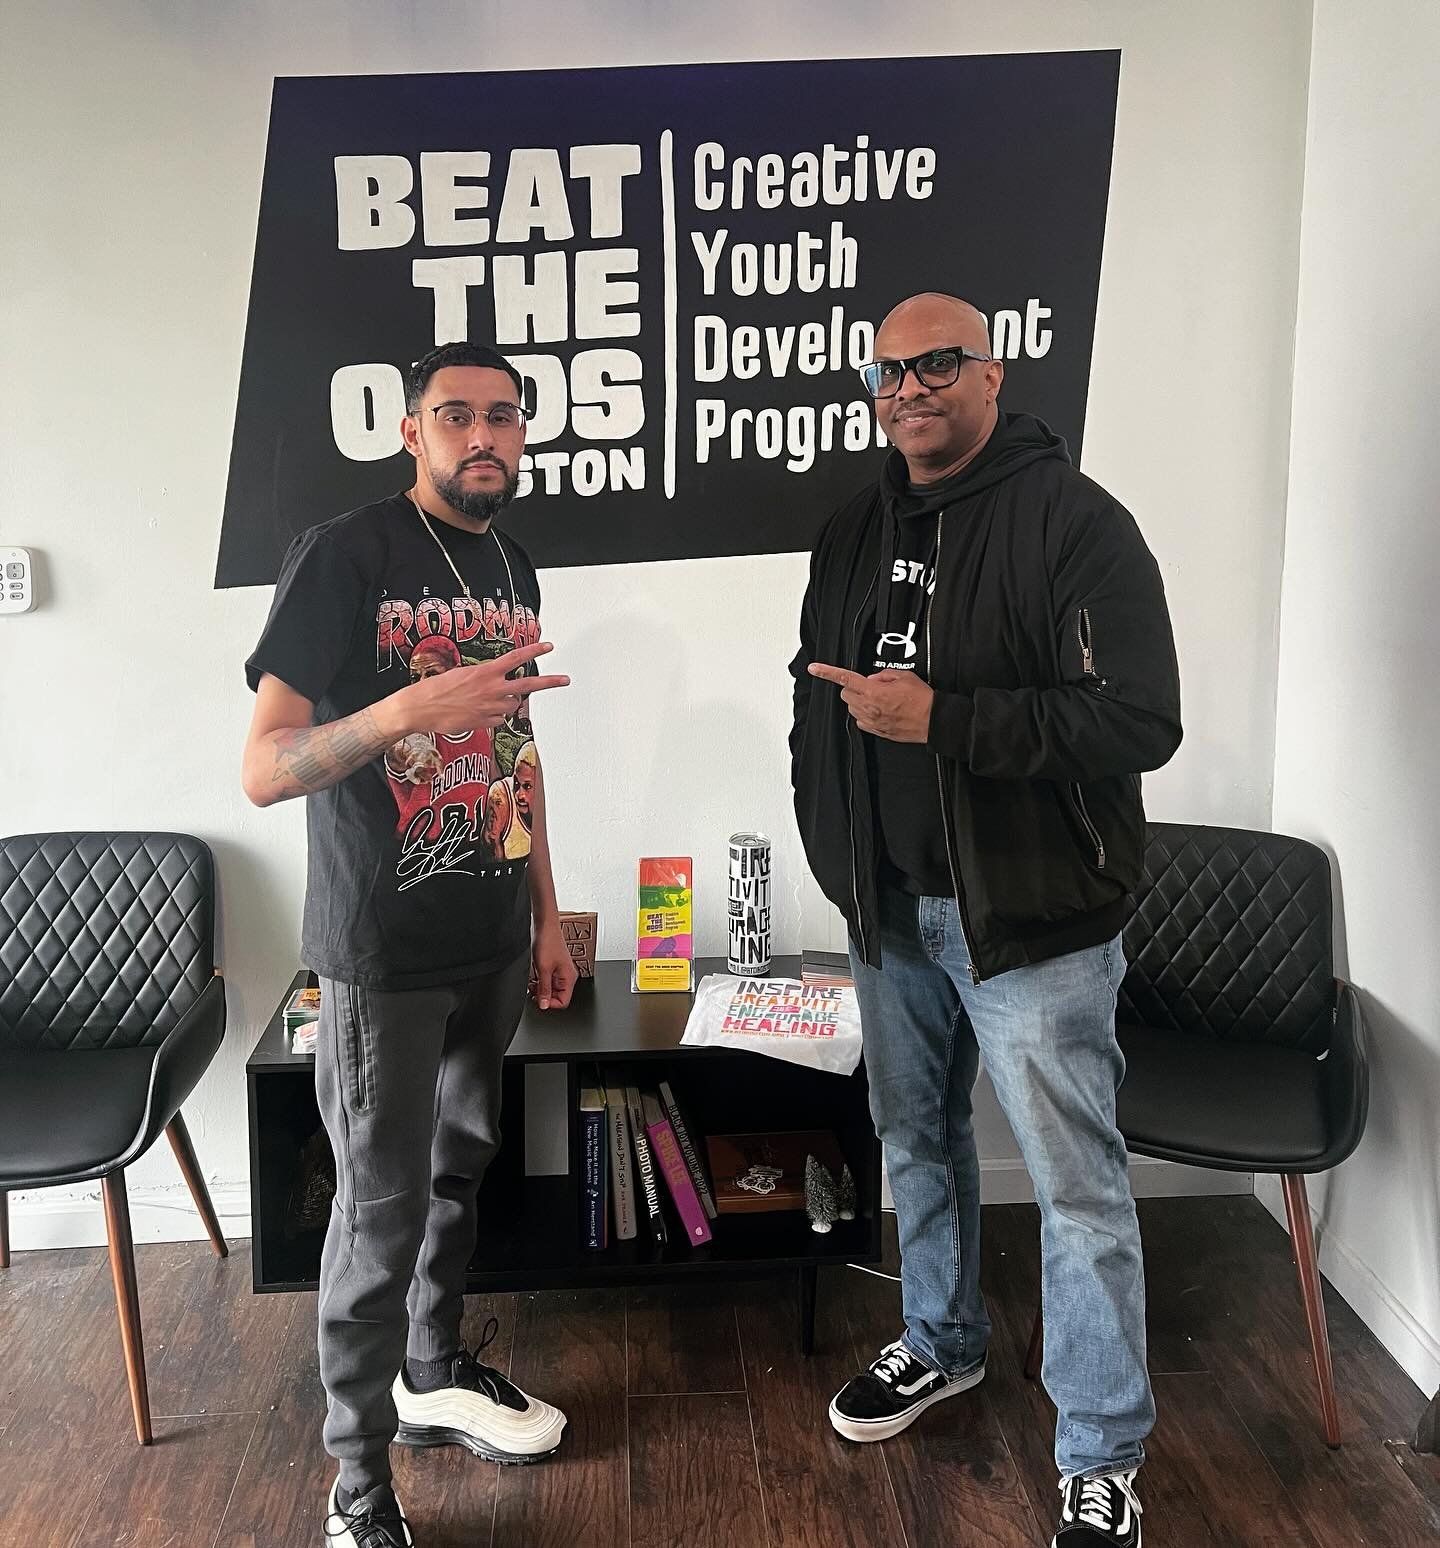 Great afternoon hanging with @gvanifilms over at @btoboston - This Creative Youth Development Program is pretty amazing! Check out: https://www.btoboston.org
#musicproduction #audioengineering #filmmaking #videoproduction #mentorship

📸: @tkyosanye 